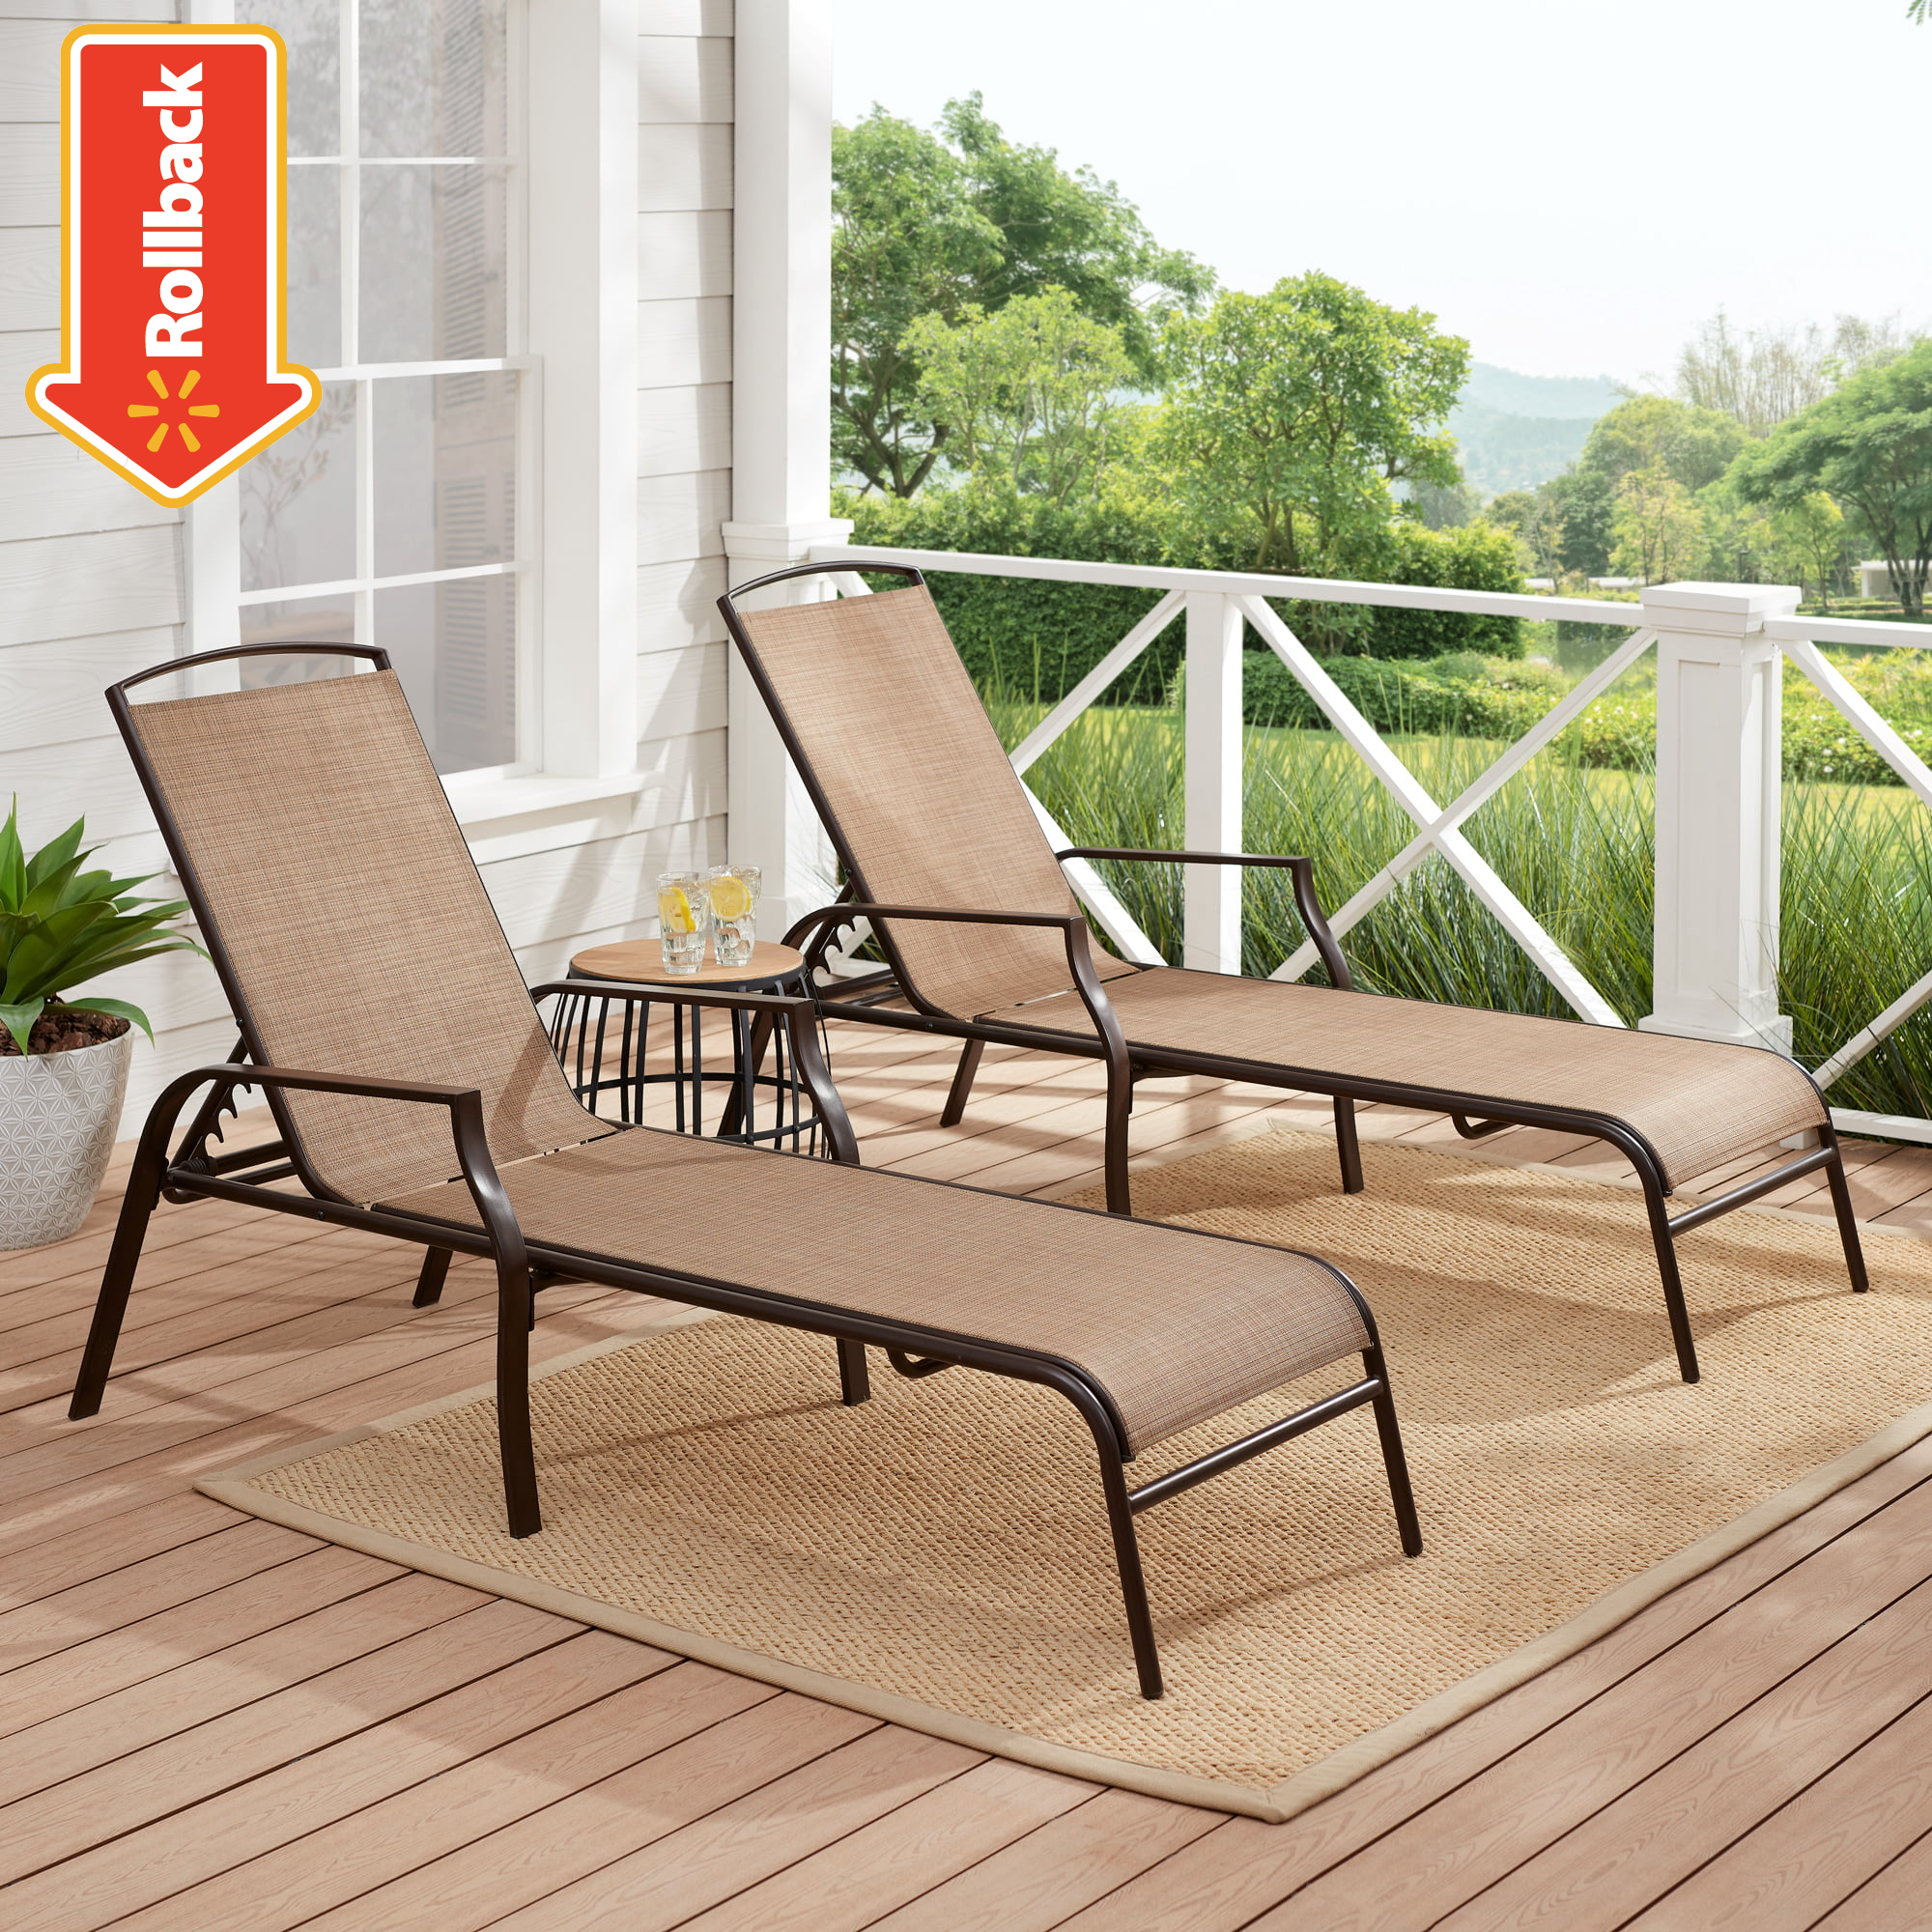 Two adjustable outdoor loungers with beige sling fabric on a porch, one upright and one reclined, with a small table between them.